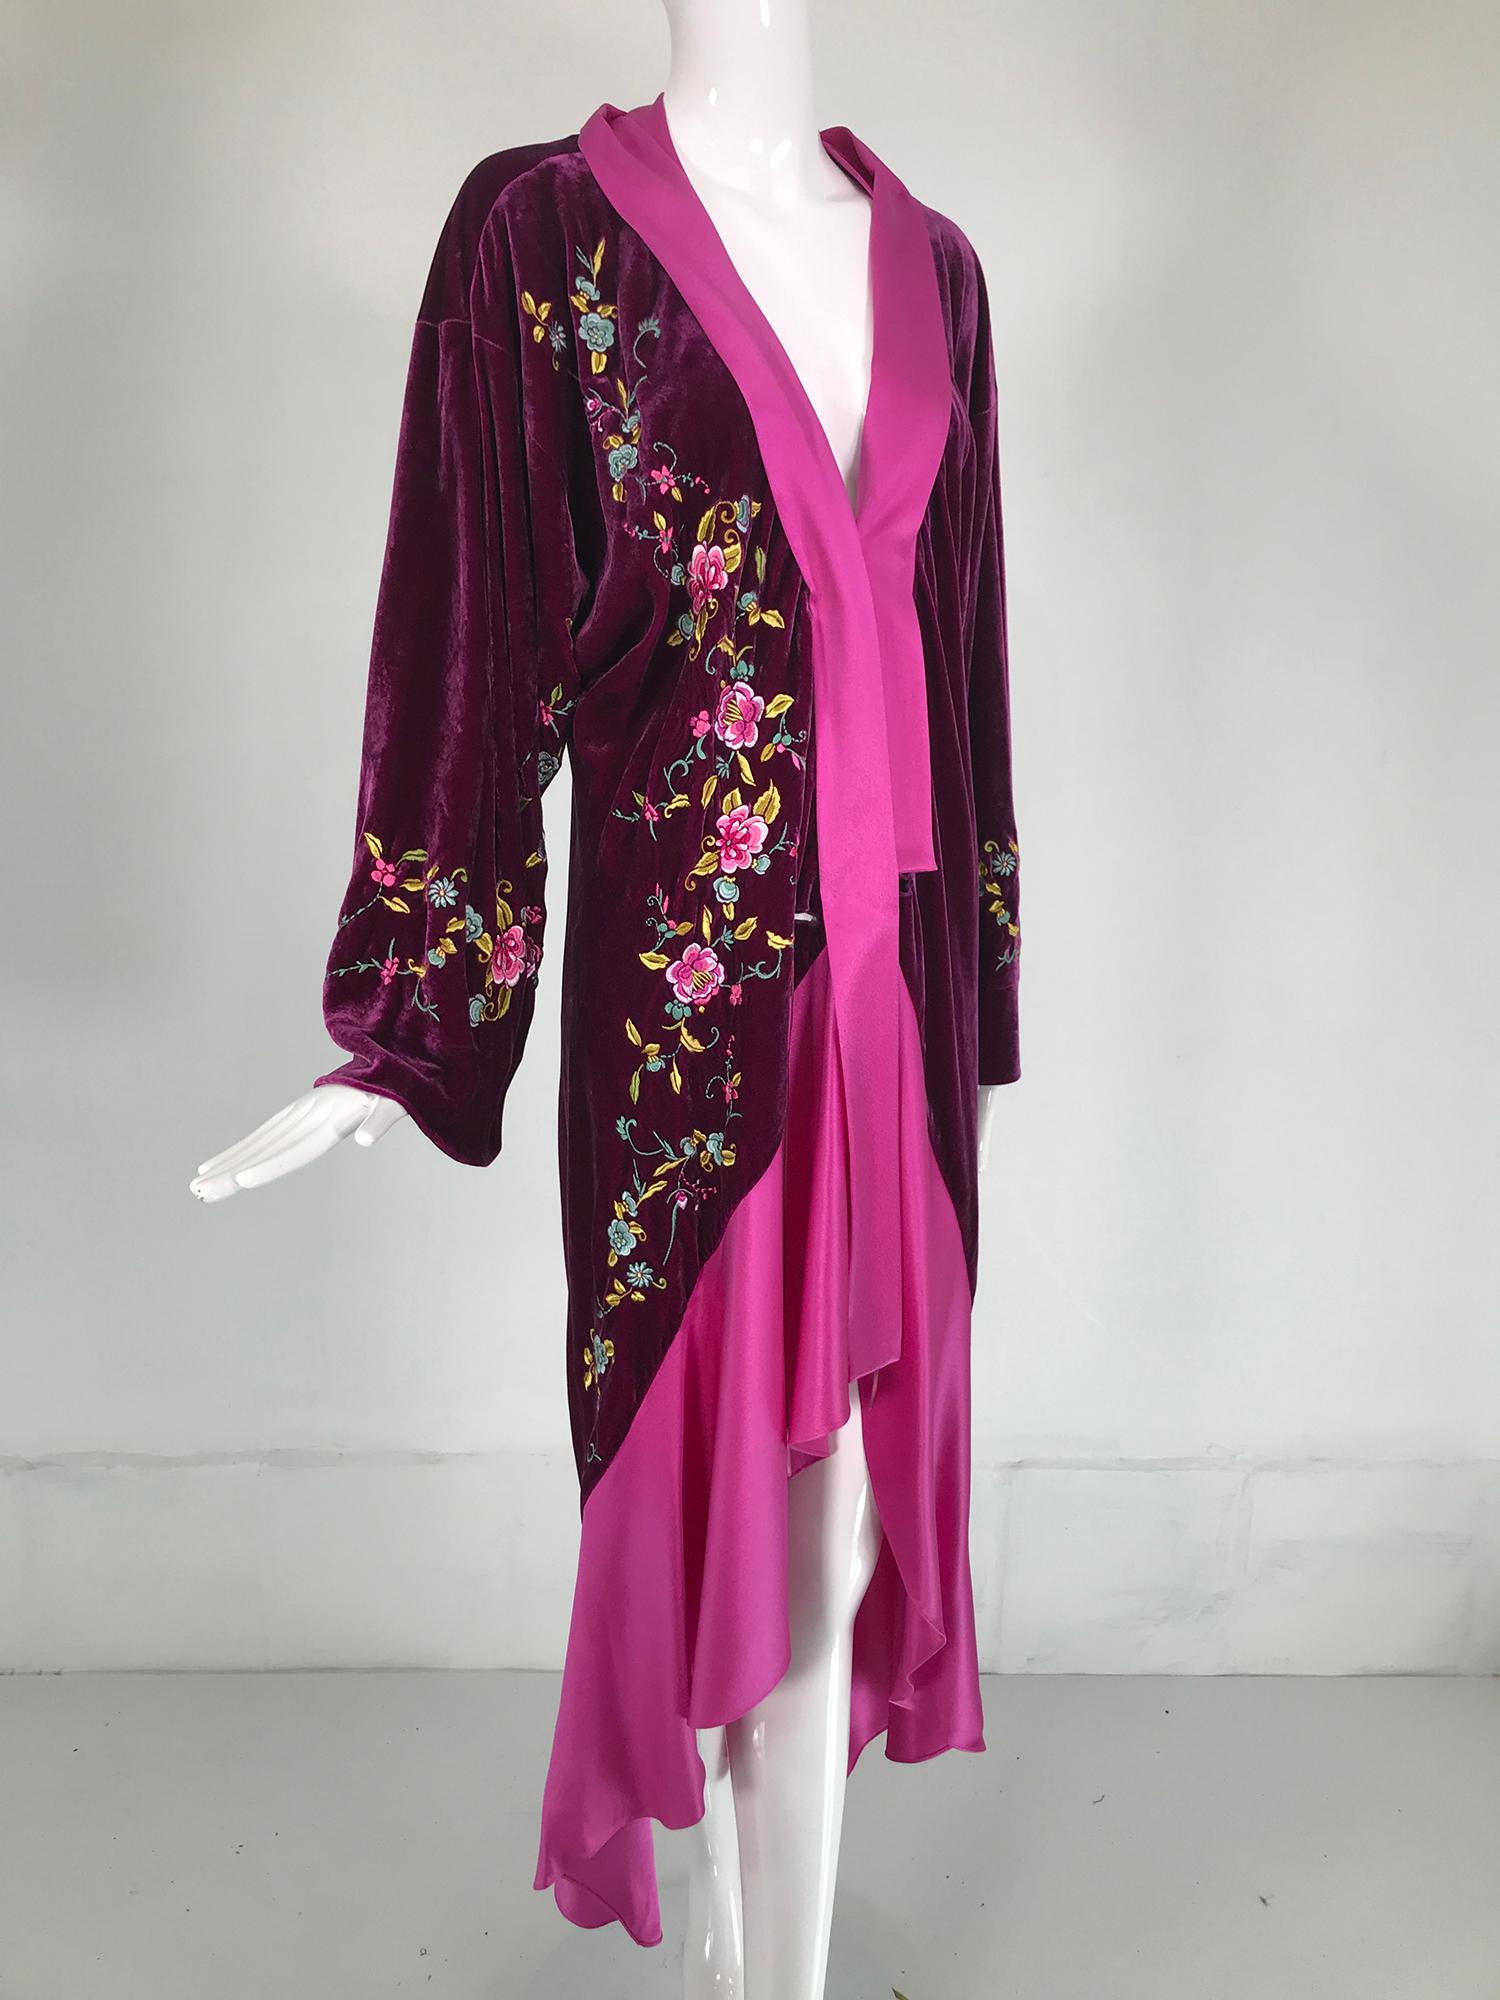 John Galliano 1920s inspired embroidered velvet & silk evening coat, early 2000's. Rare to find Galliano coat in wine velvet with colourful floral embroidery. The coat has dropped shoulders & wide kimono sleeves with embroidered detail. Bias cut